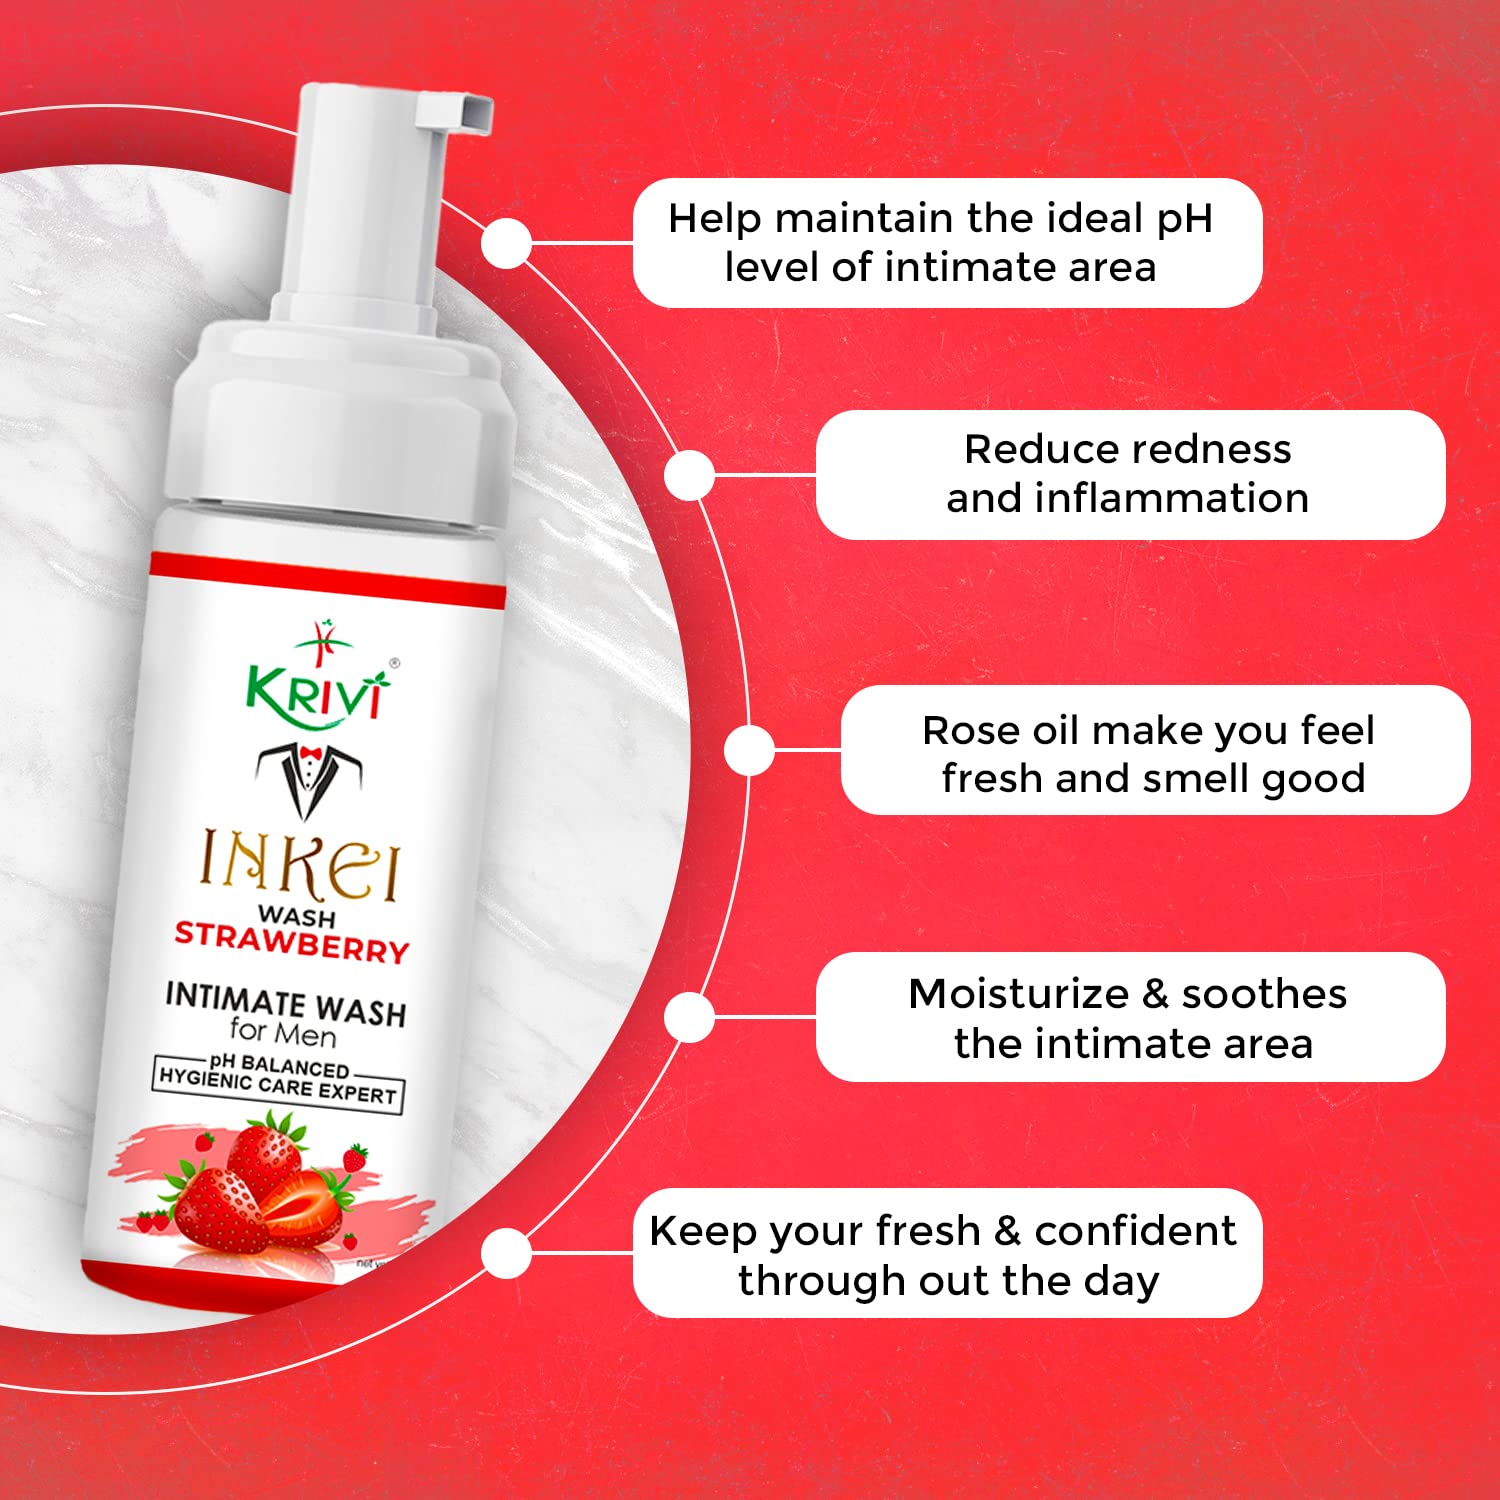 Krivi Inkei Foaming Intimate Wash Strawberry for Man The hygiene care expert with sweetness of Strawberry with Tree Tea Oil, Sea Buckthorn Oil, and goodness of Shilajit & Ashwagandha. 150 ml (Pack of 1)